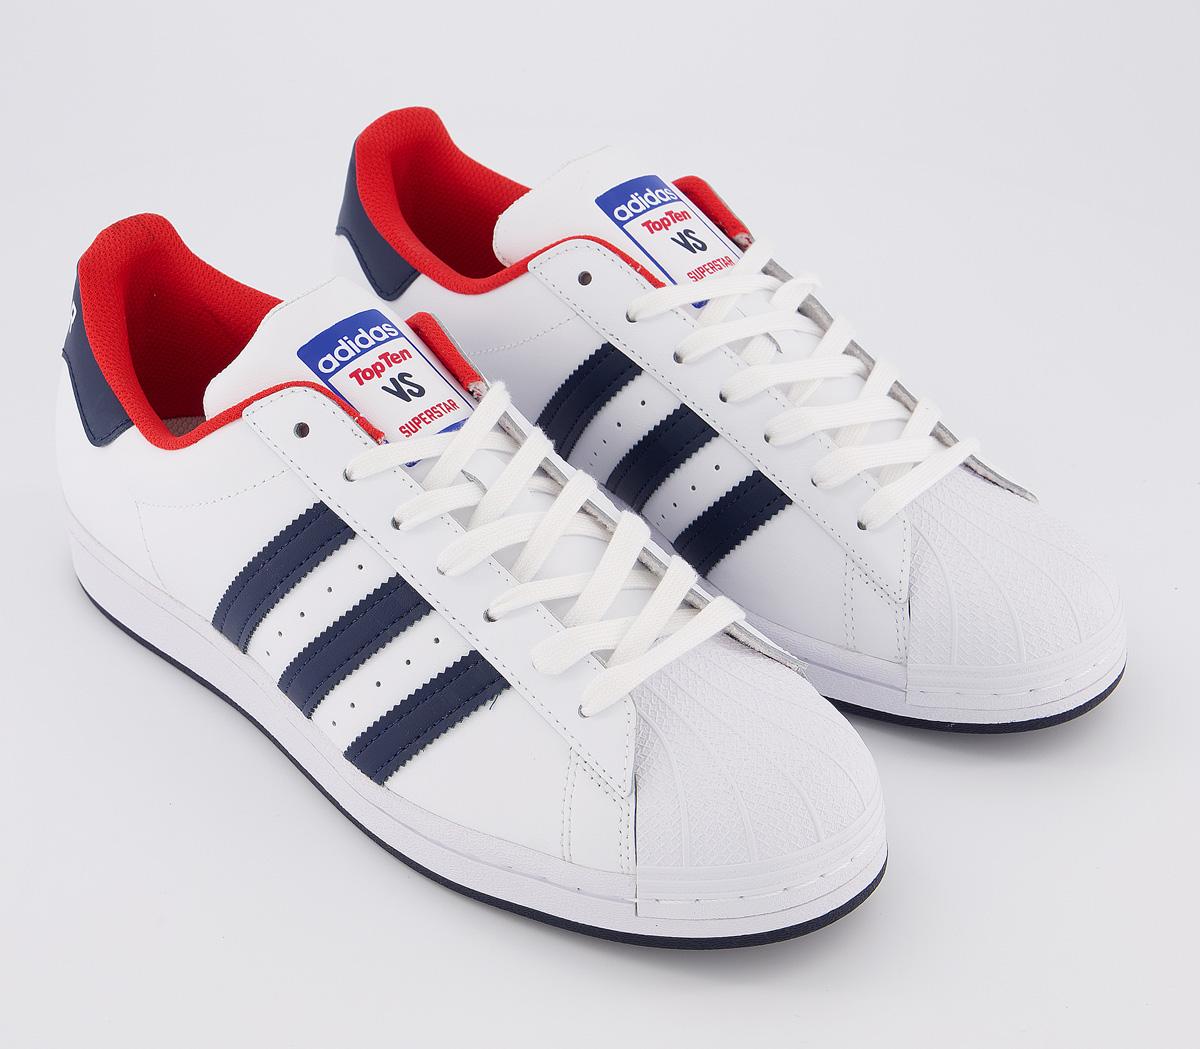 adidas Superstar Trainers White Navy Red - Unisex Sports